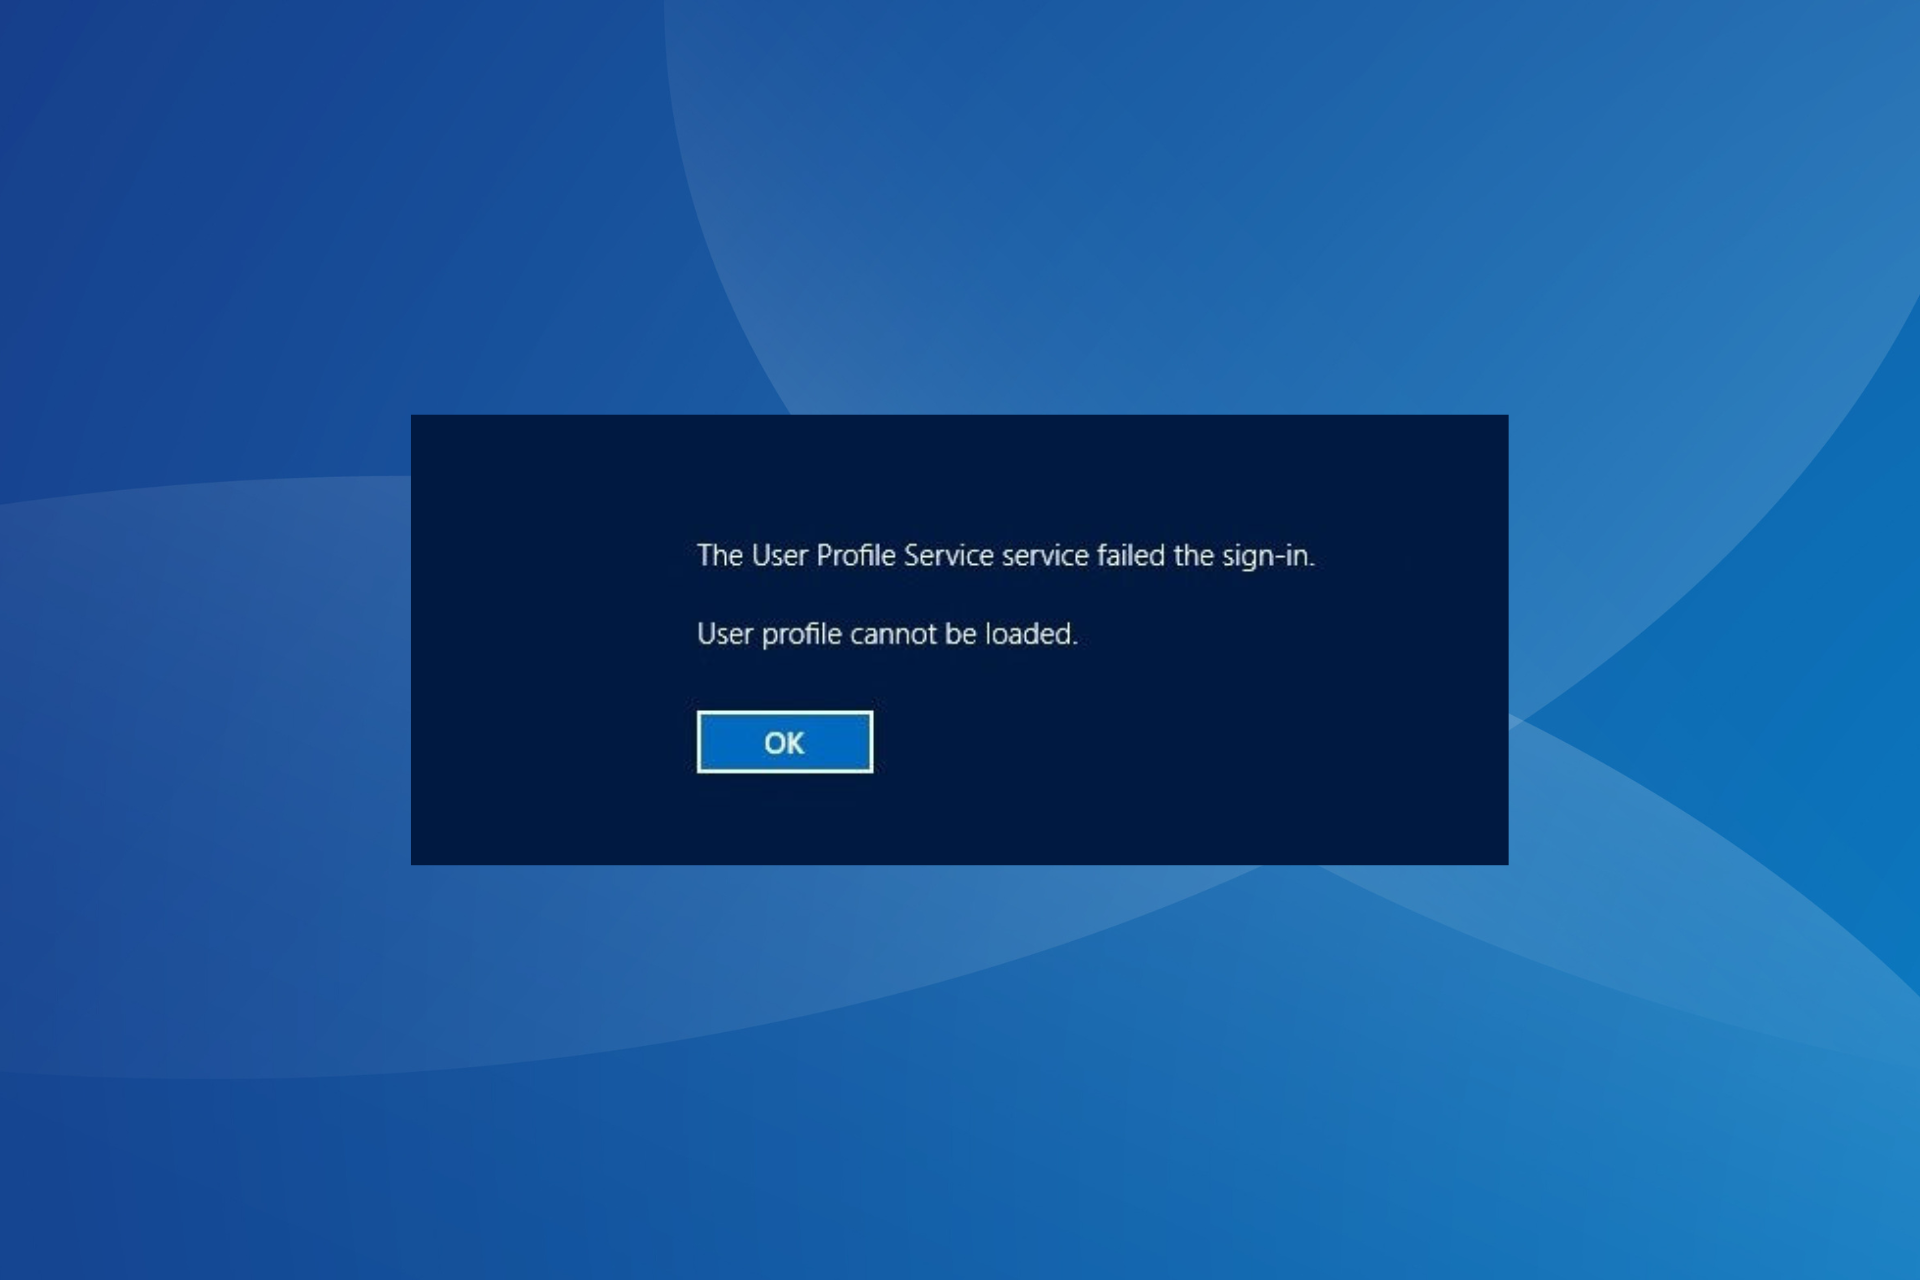 fix the user profile service failed the sign-in on windows 10